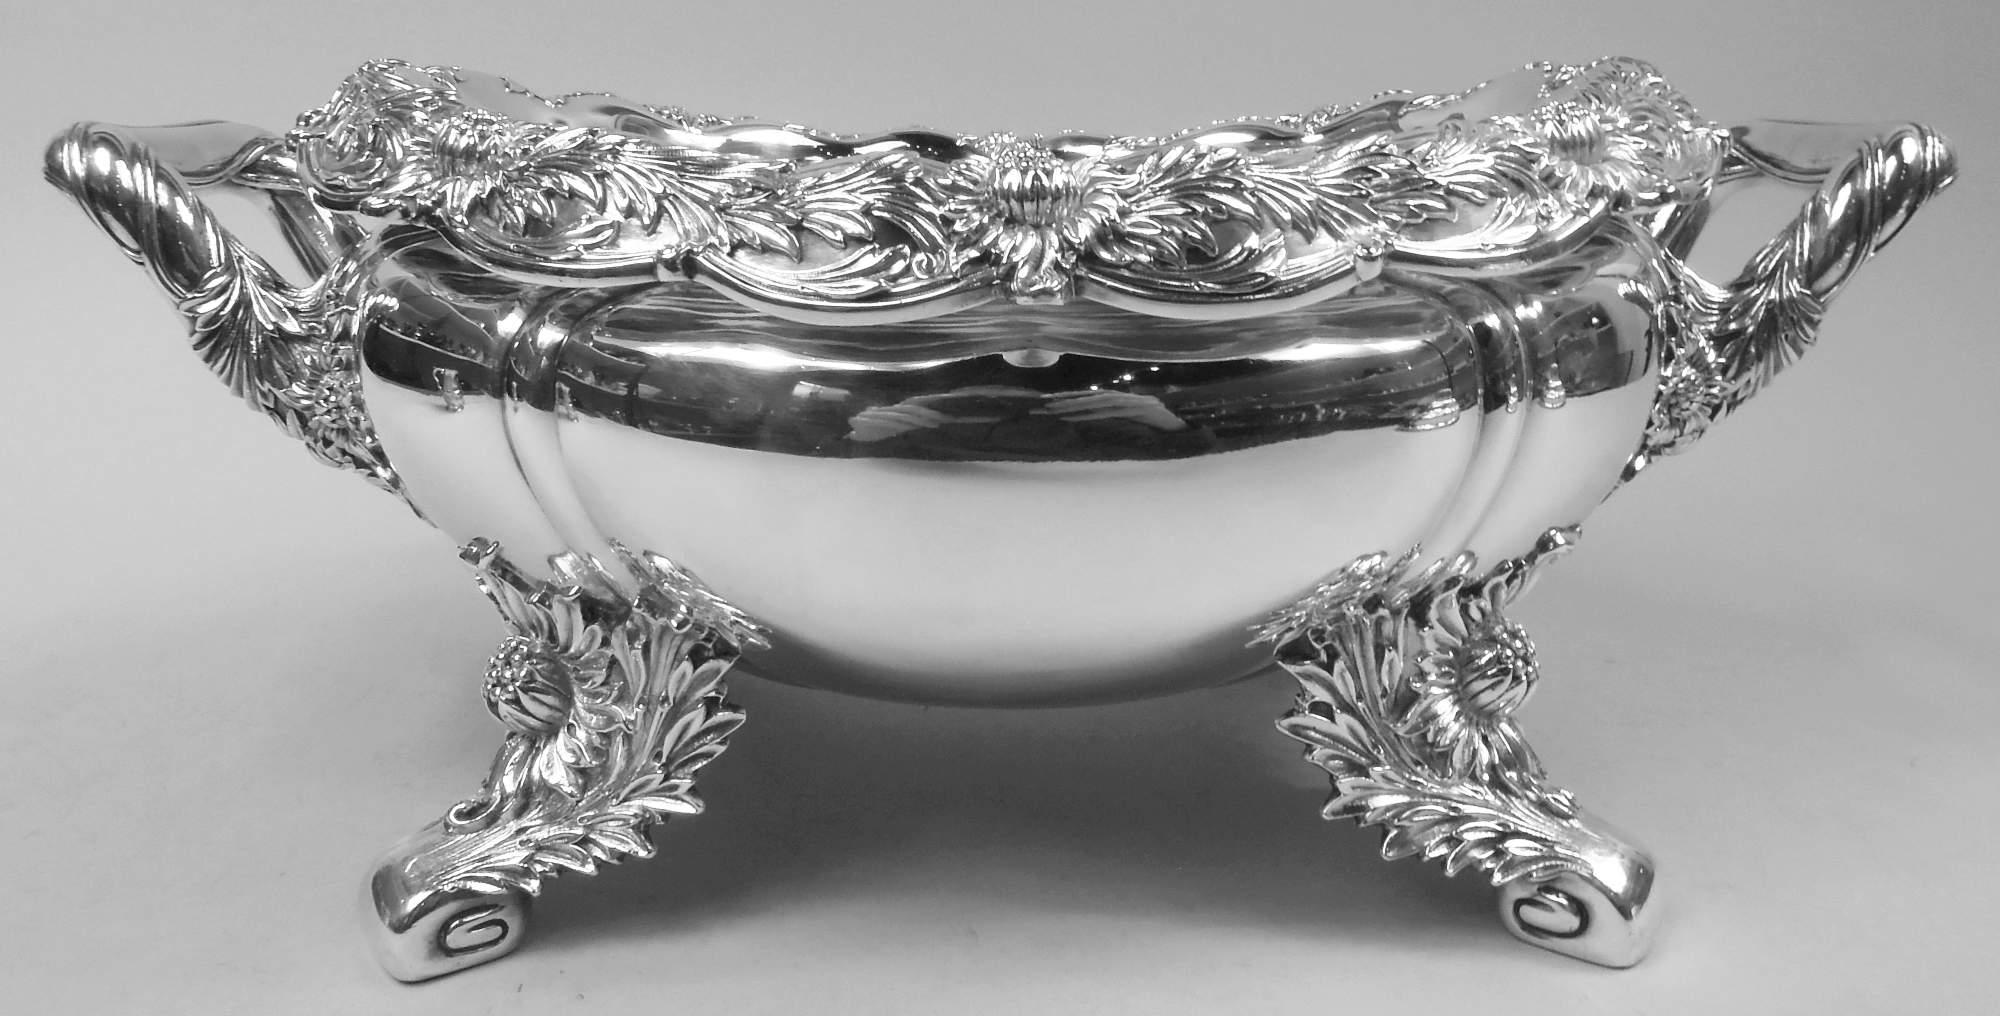 19th Century Rare Tiffany Sterling Silver Soup Tureen in Historic Chrysanthemum Pattern For Sale